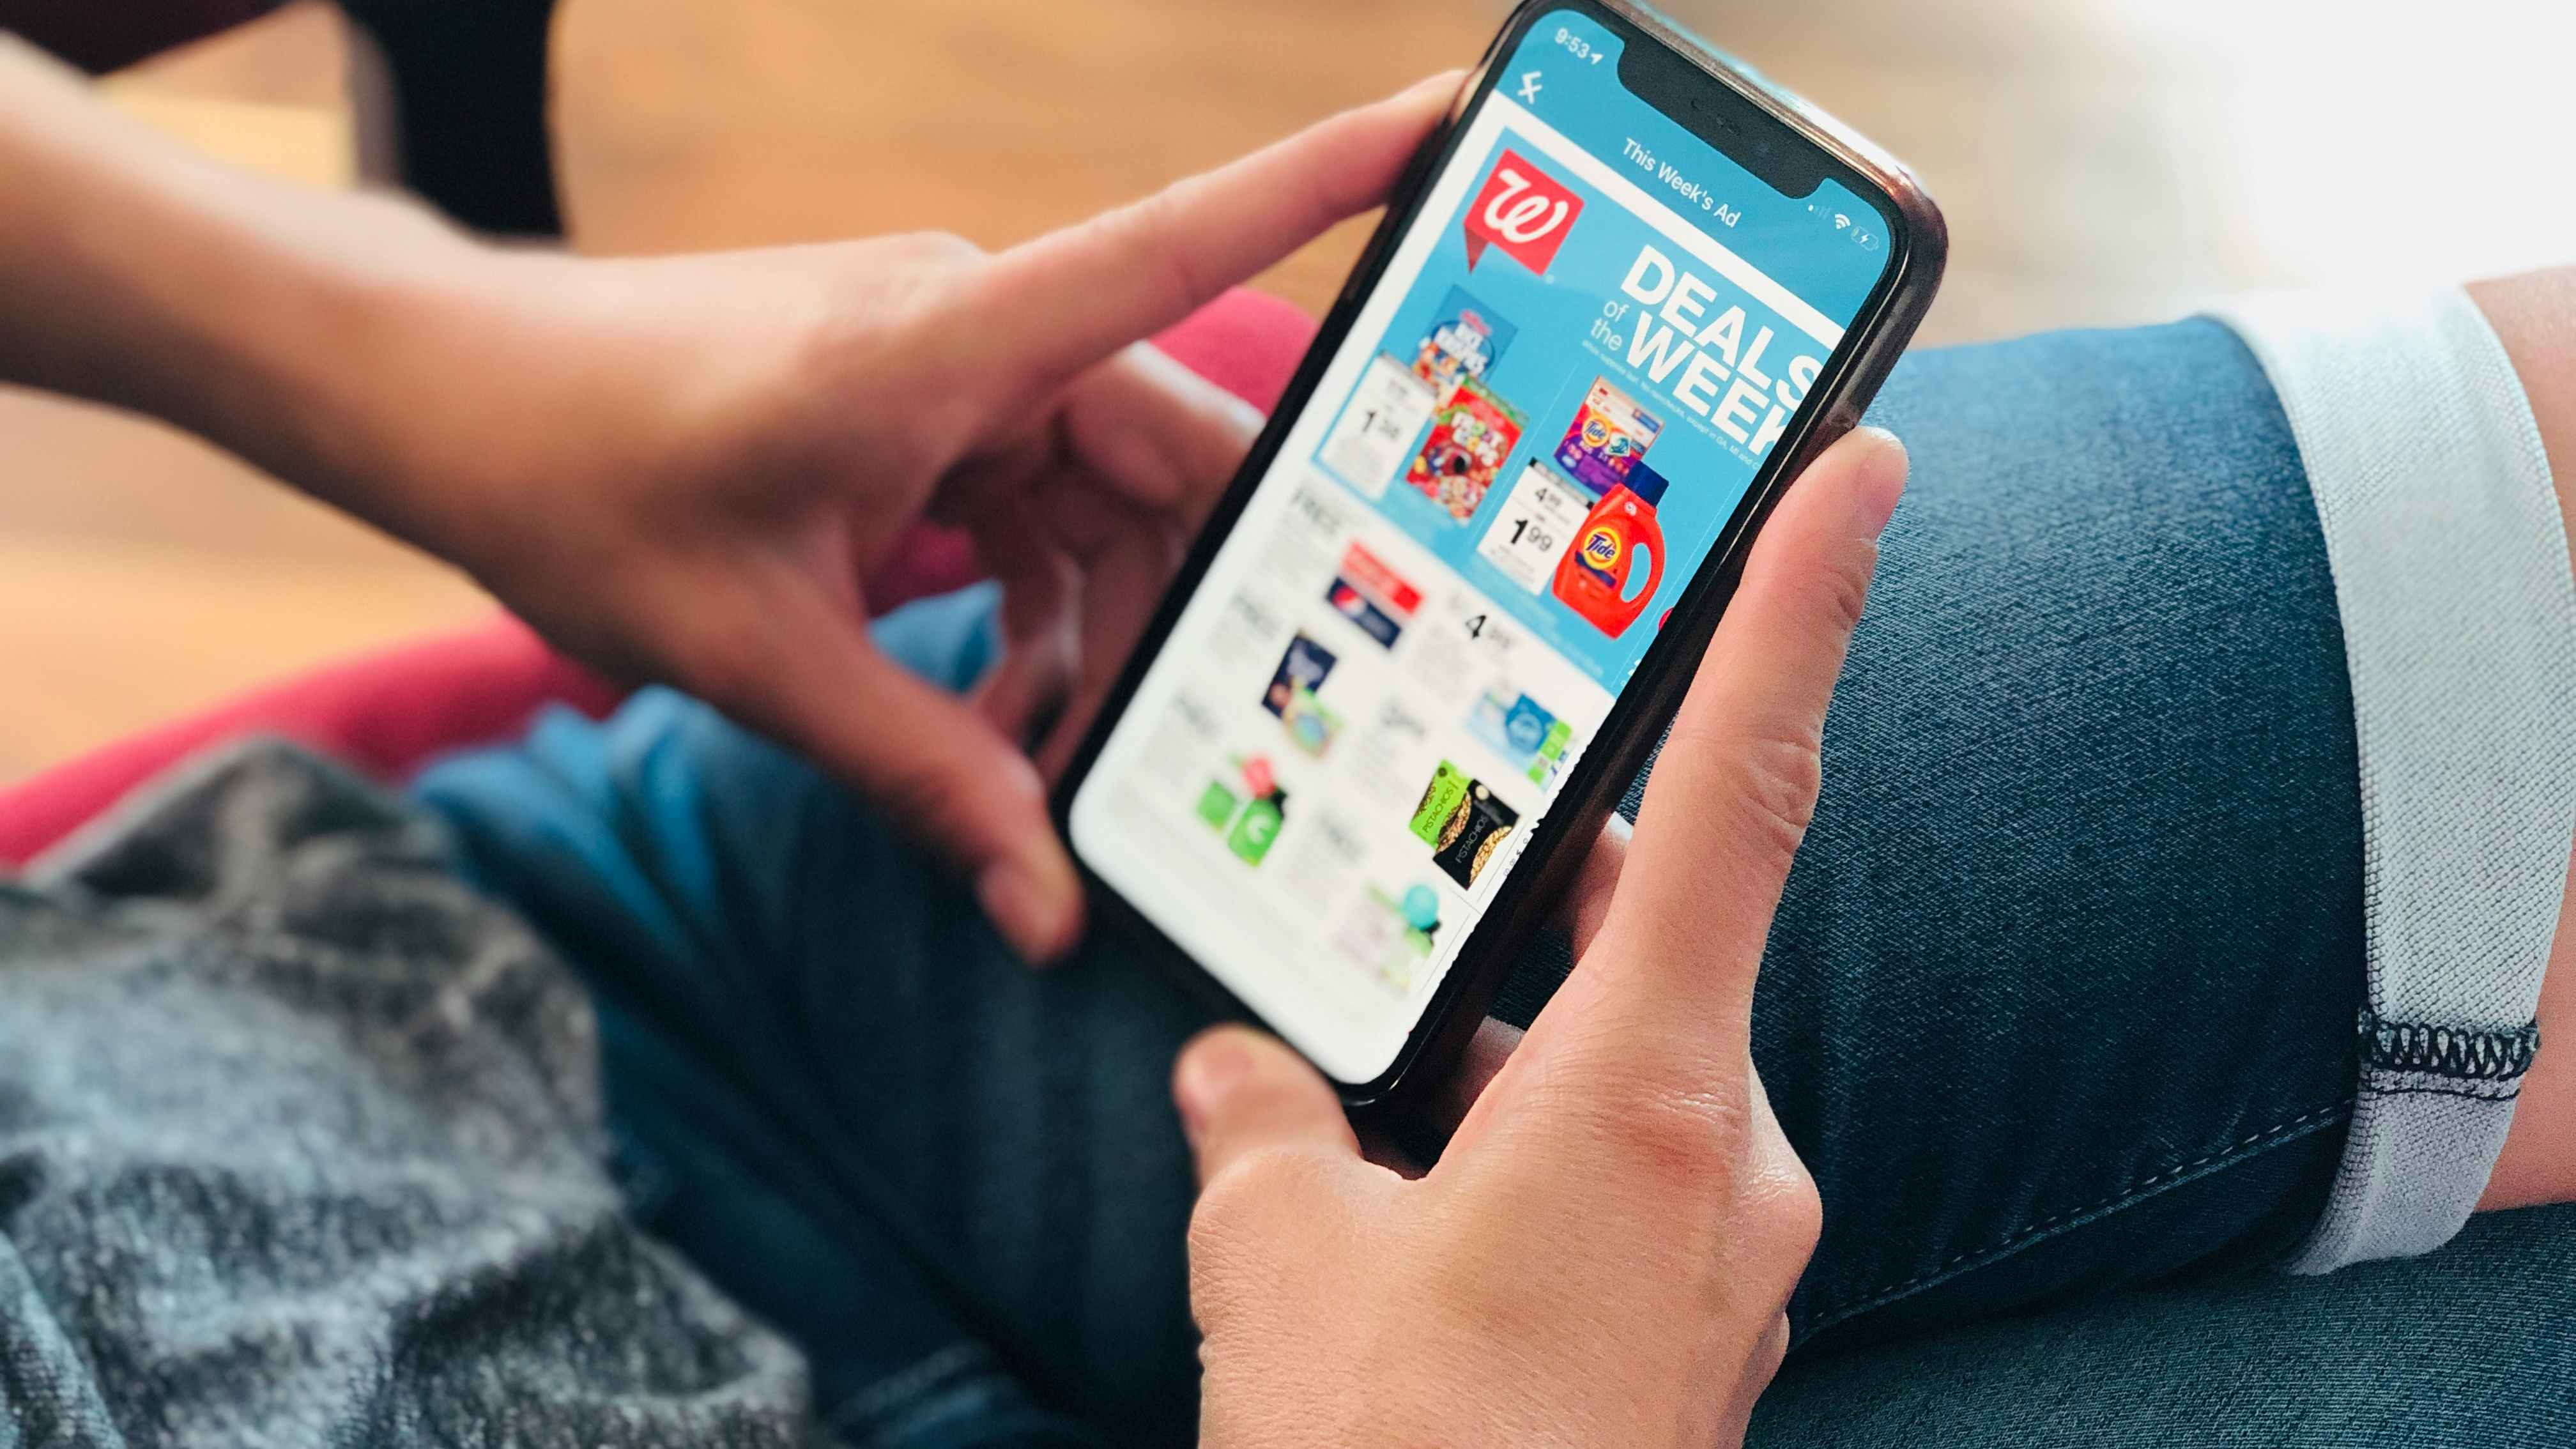 Download the Walgreens app and use digital coupons galore.